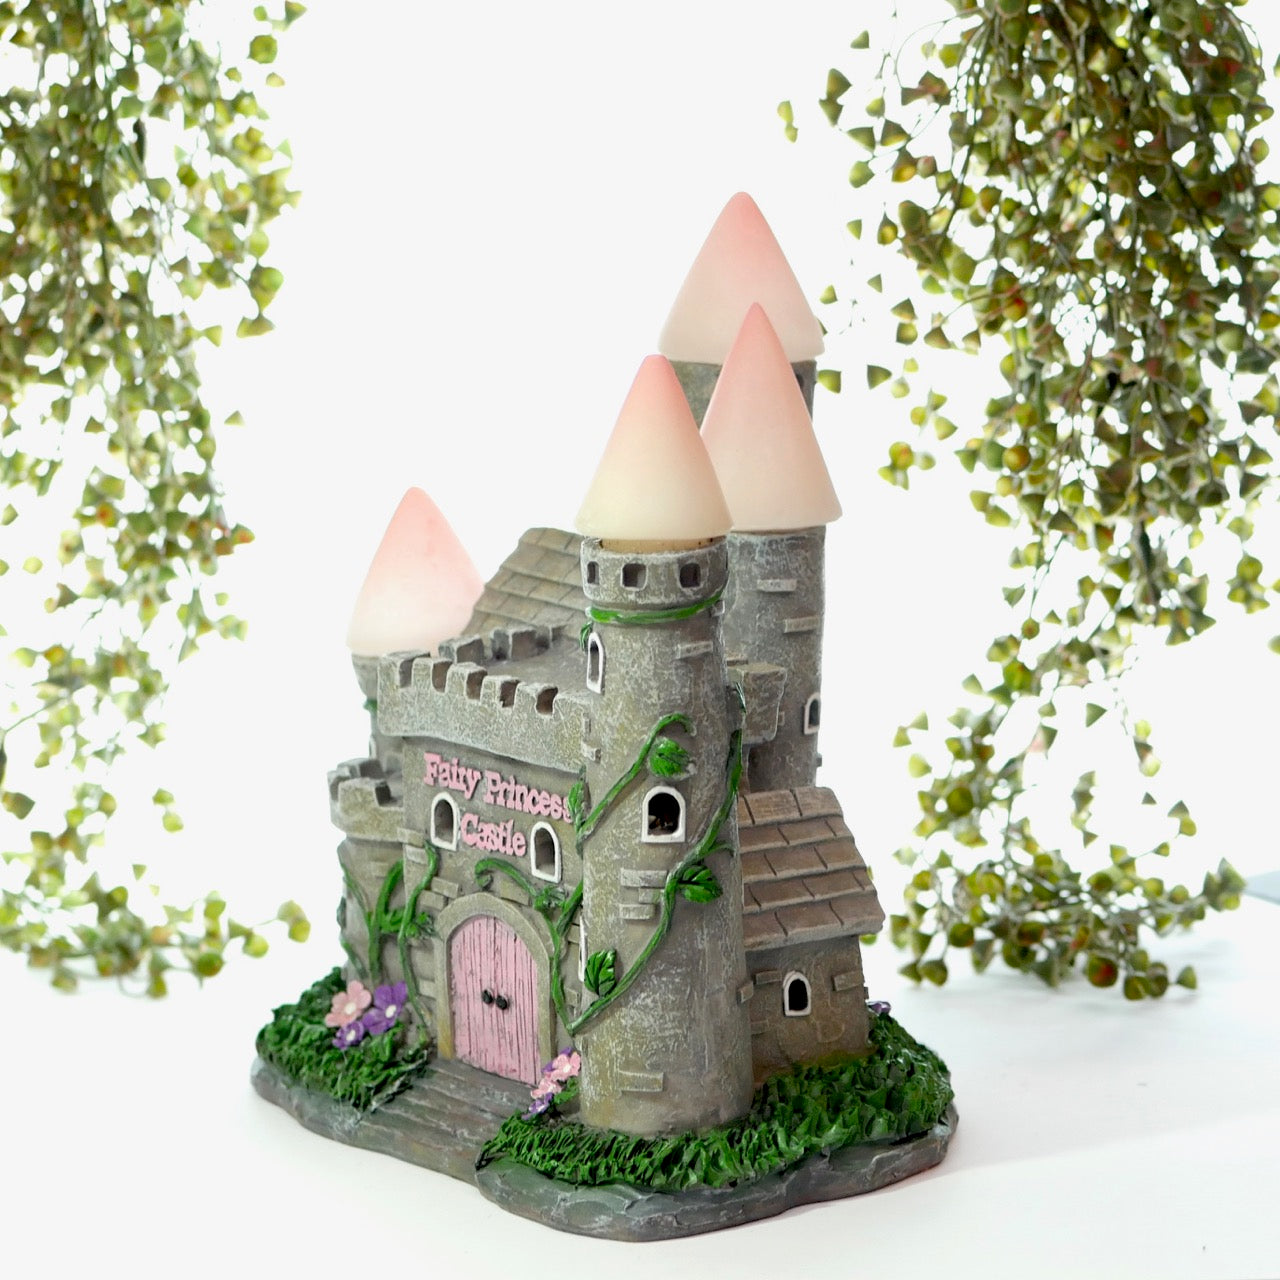 Fairy House Castle with Solar Powered Lights from Steph the Fairy Maker in Australia